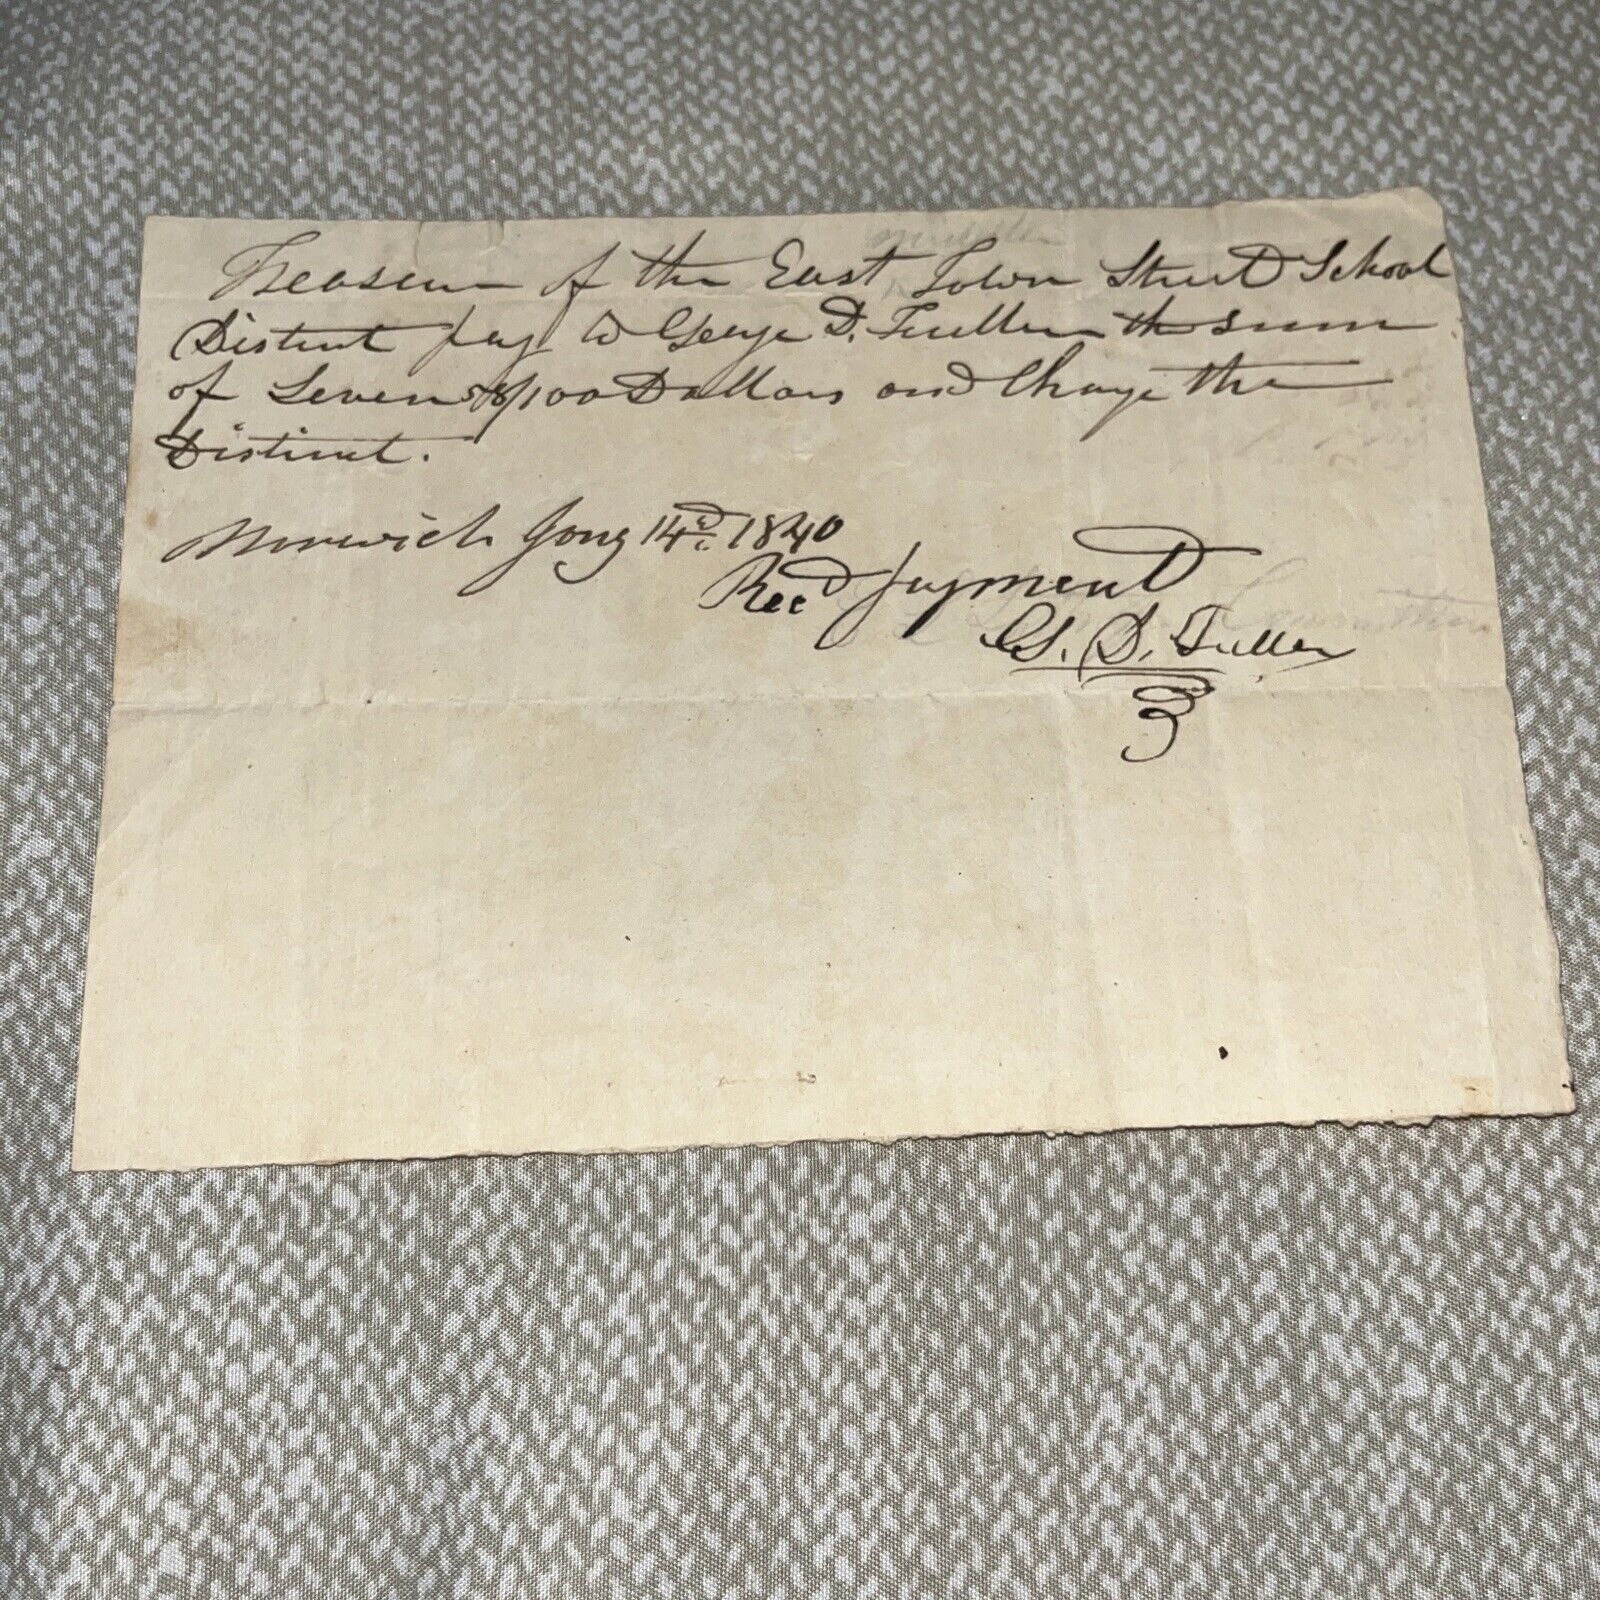 1840 Order to Pay: East Town Street School District - Norwich CT George Fuller